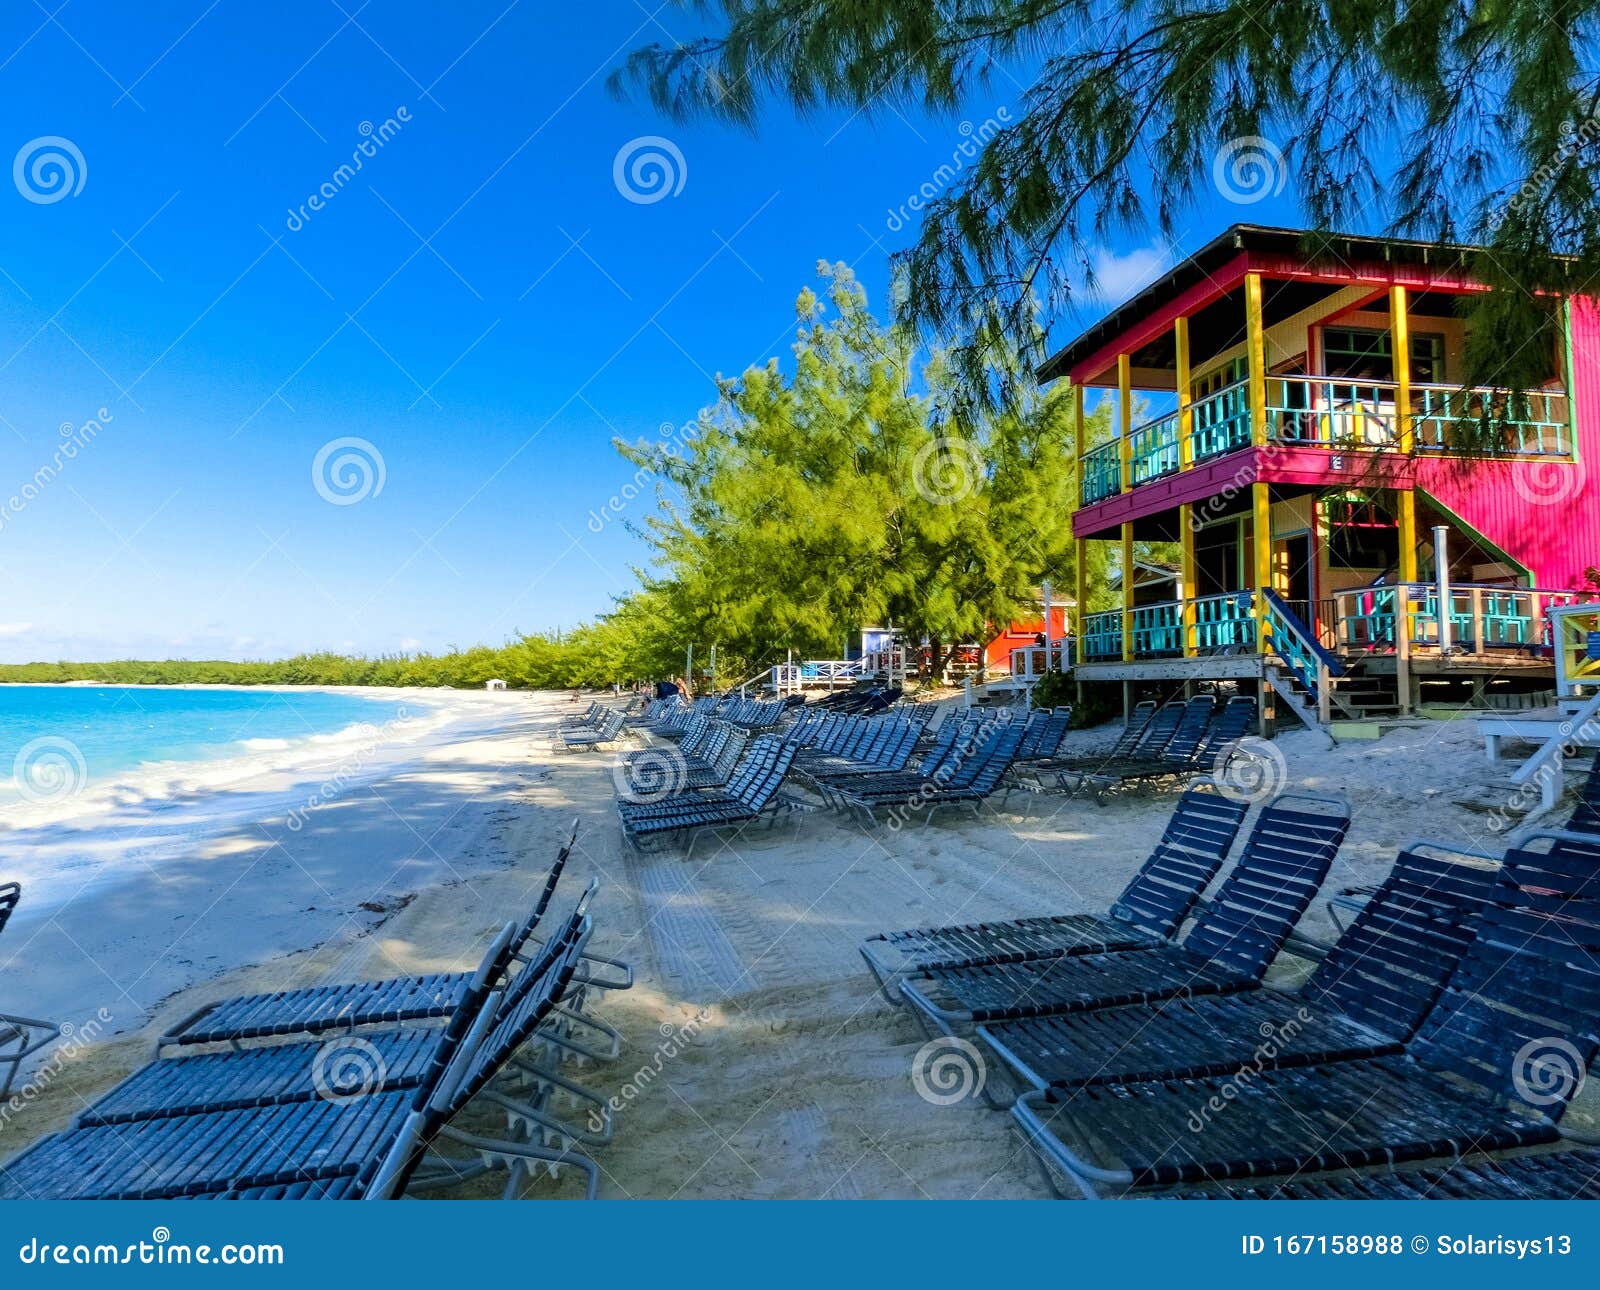 Colorful Tropical Cabanas Or Shelters On The Beach Of Half Moon Cay Stock Photo Image Of Anchor Colorful